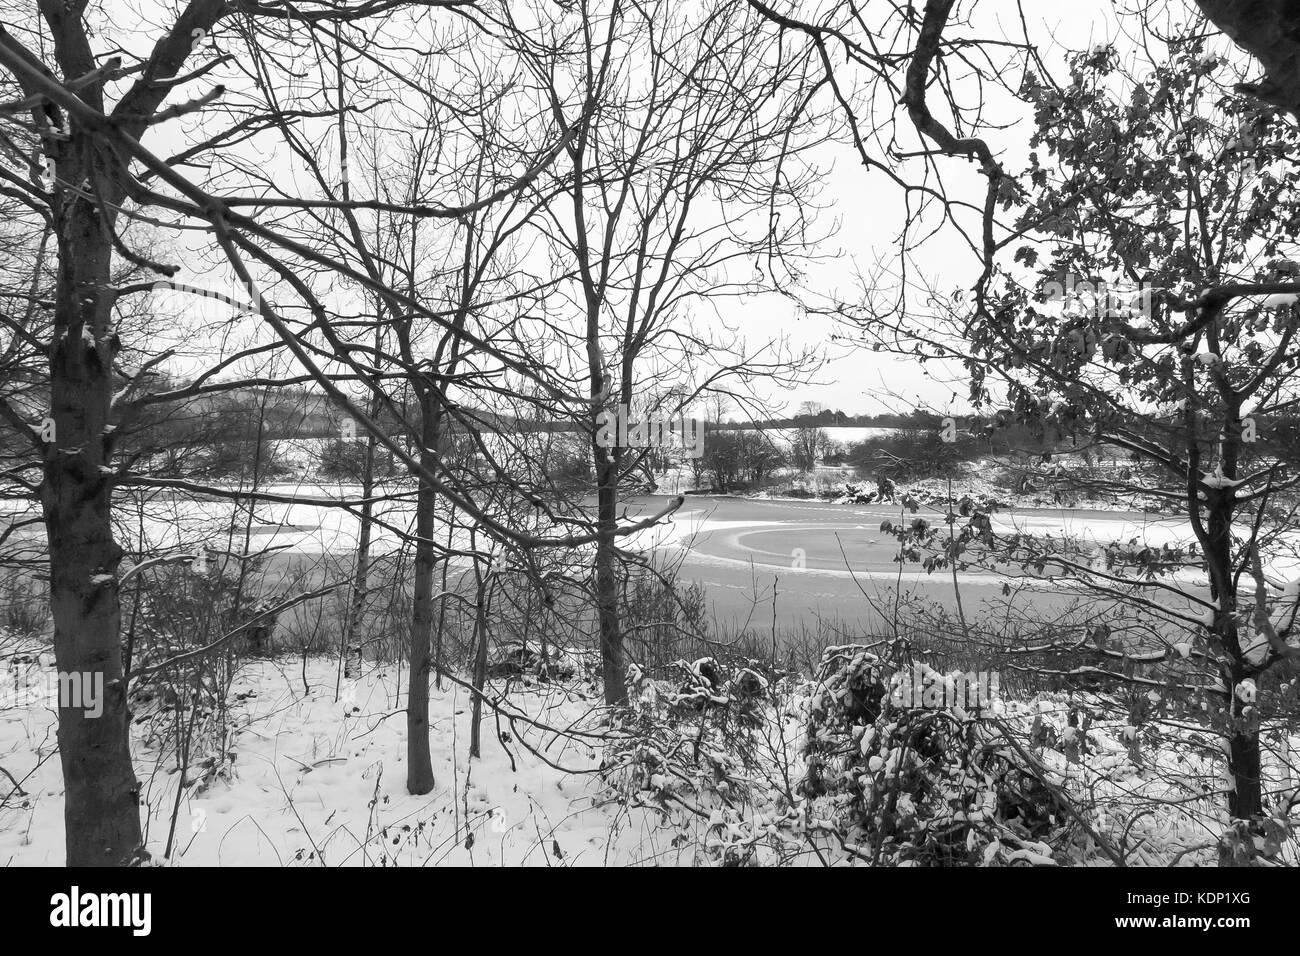 Black and white image of snowy winter scene with frozen lake Stock Photo